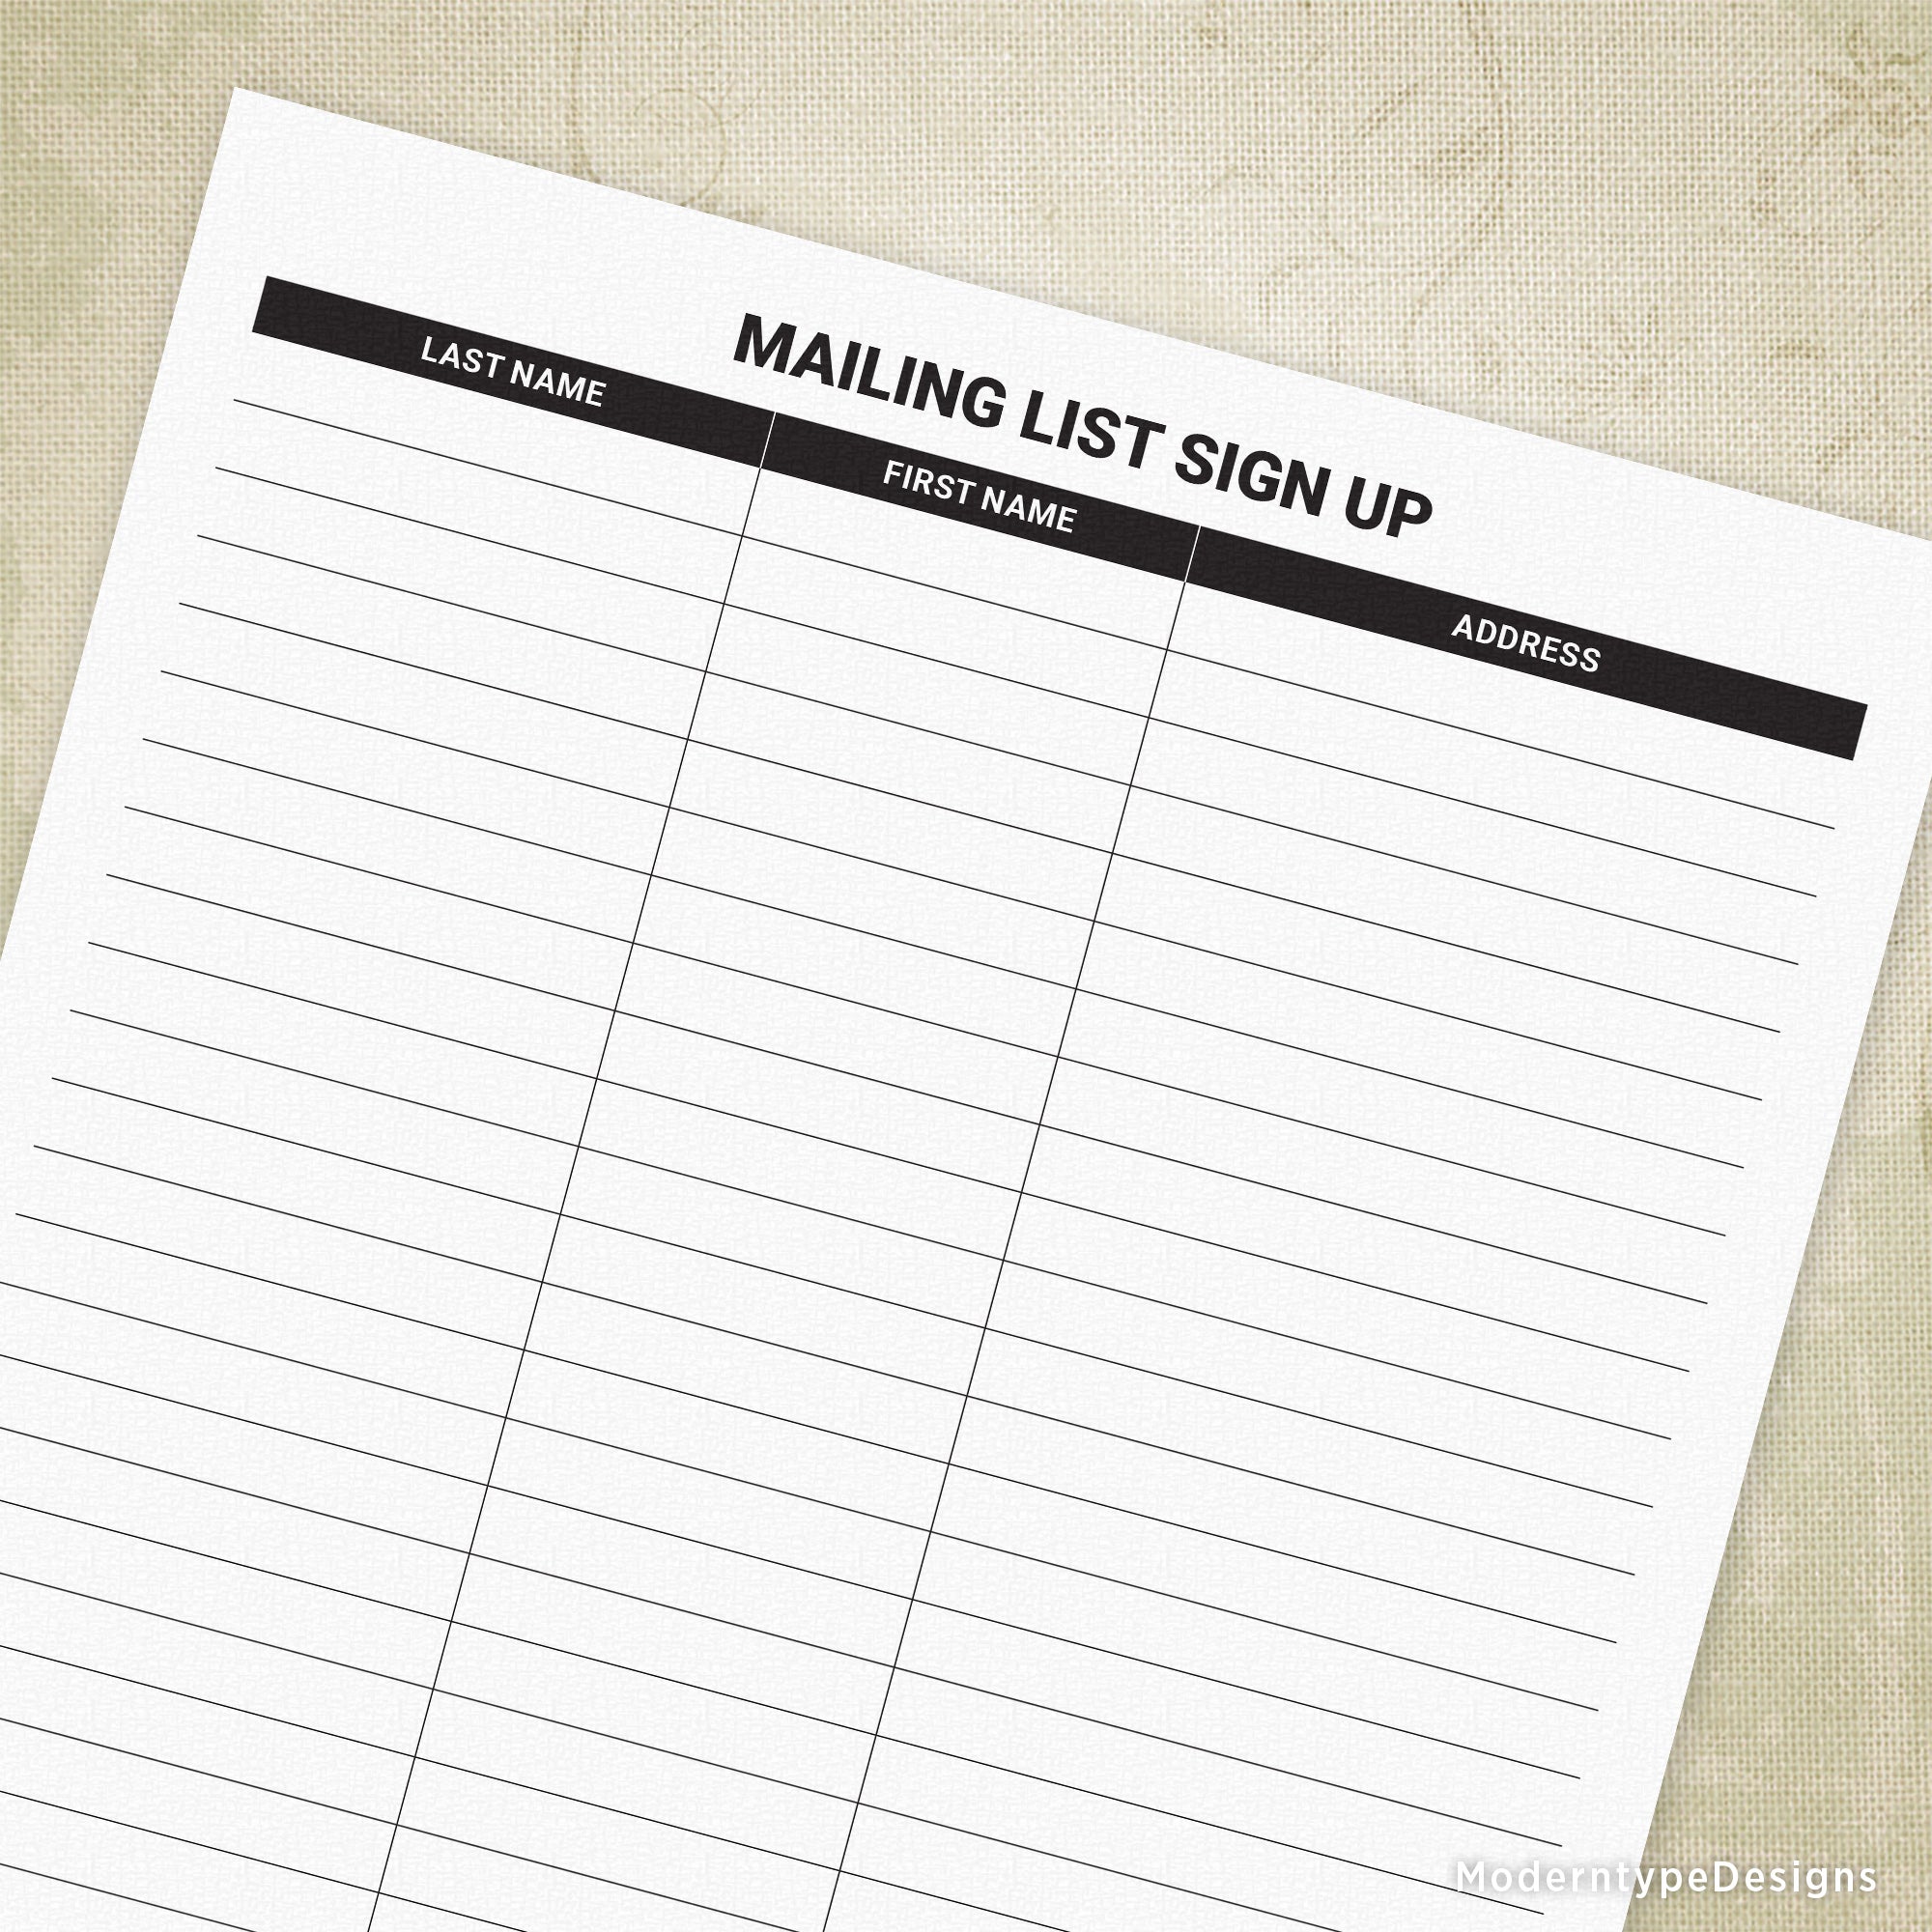 Mailing List Sign Up Sheet Printable for Clipboard